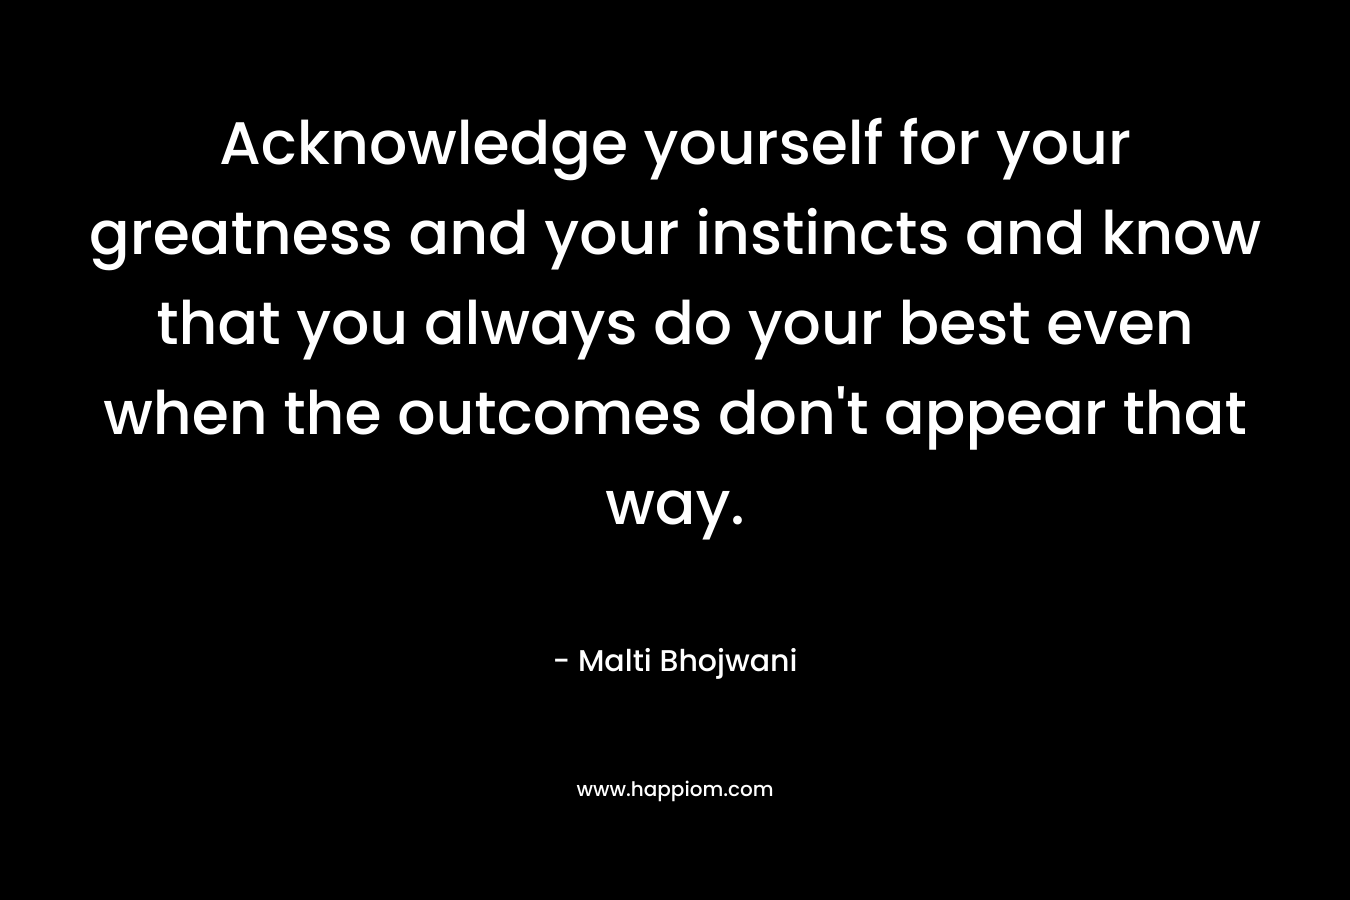 Acknowledge yourself for your greatness and your instincts and know that you always do your best even when the outcomes don’t appear that way. – Malti Bhojwani